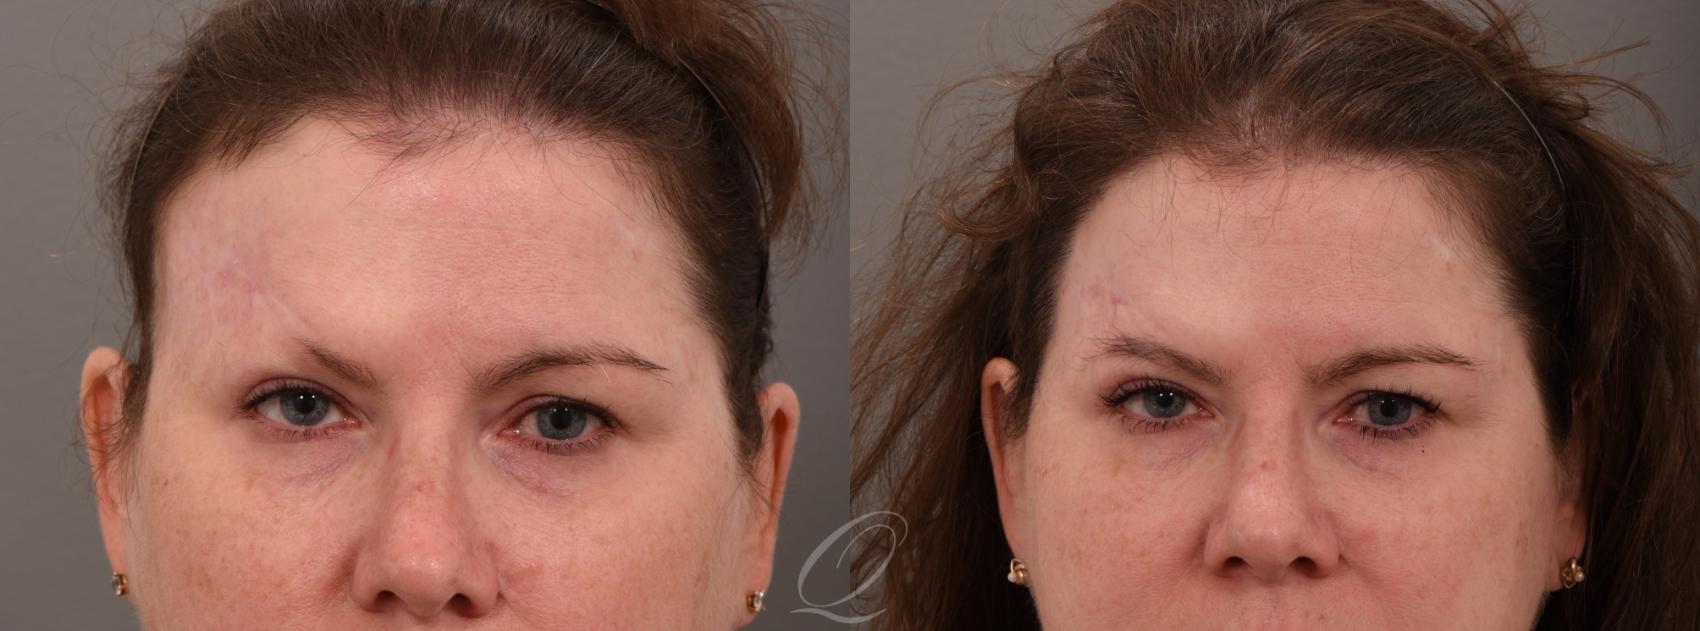 Female FUT Hair Transplant Case 1001576 Before & After Front | Serving Rochester, Syracuse & Buffalo, NY | Quatela Center for Plastic Surgery